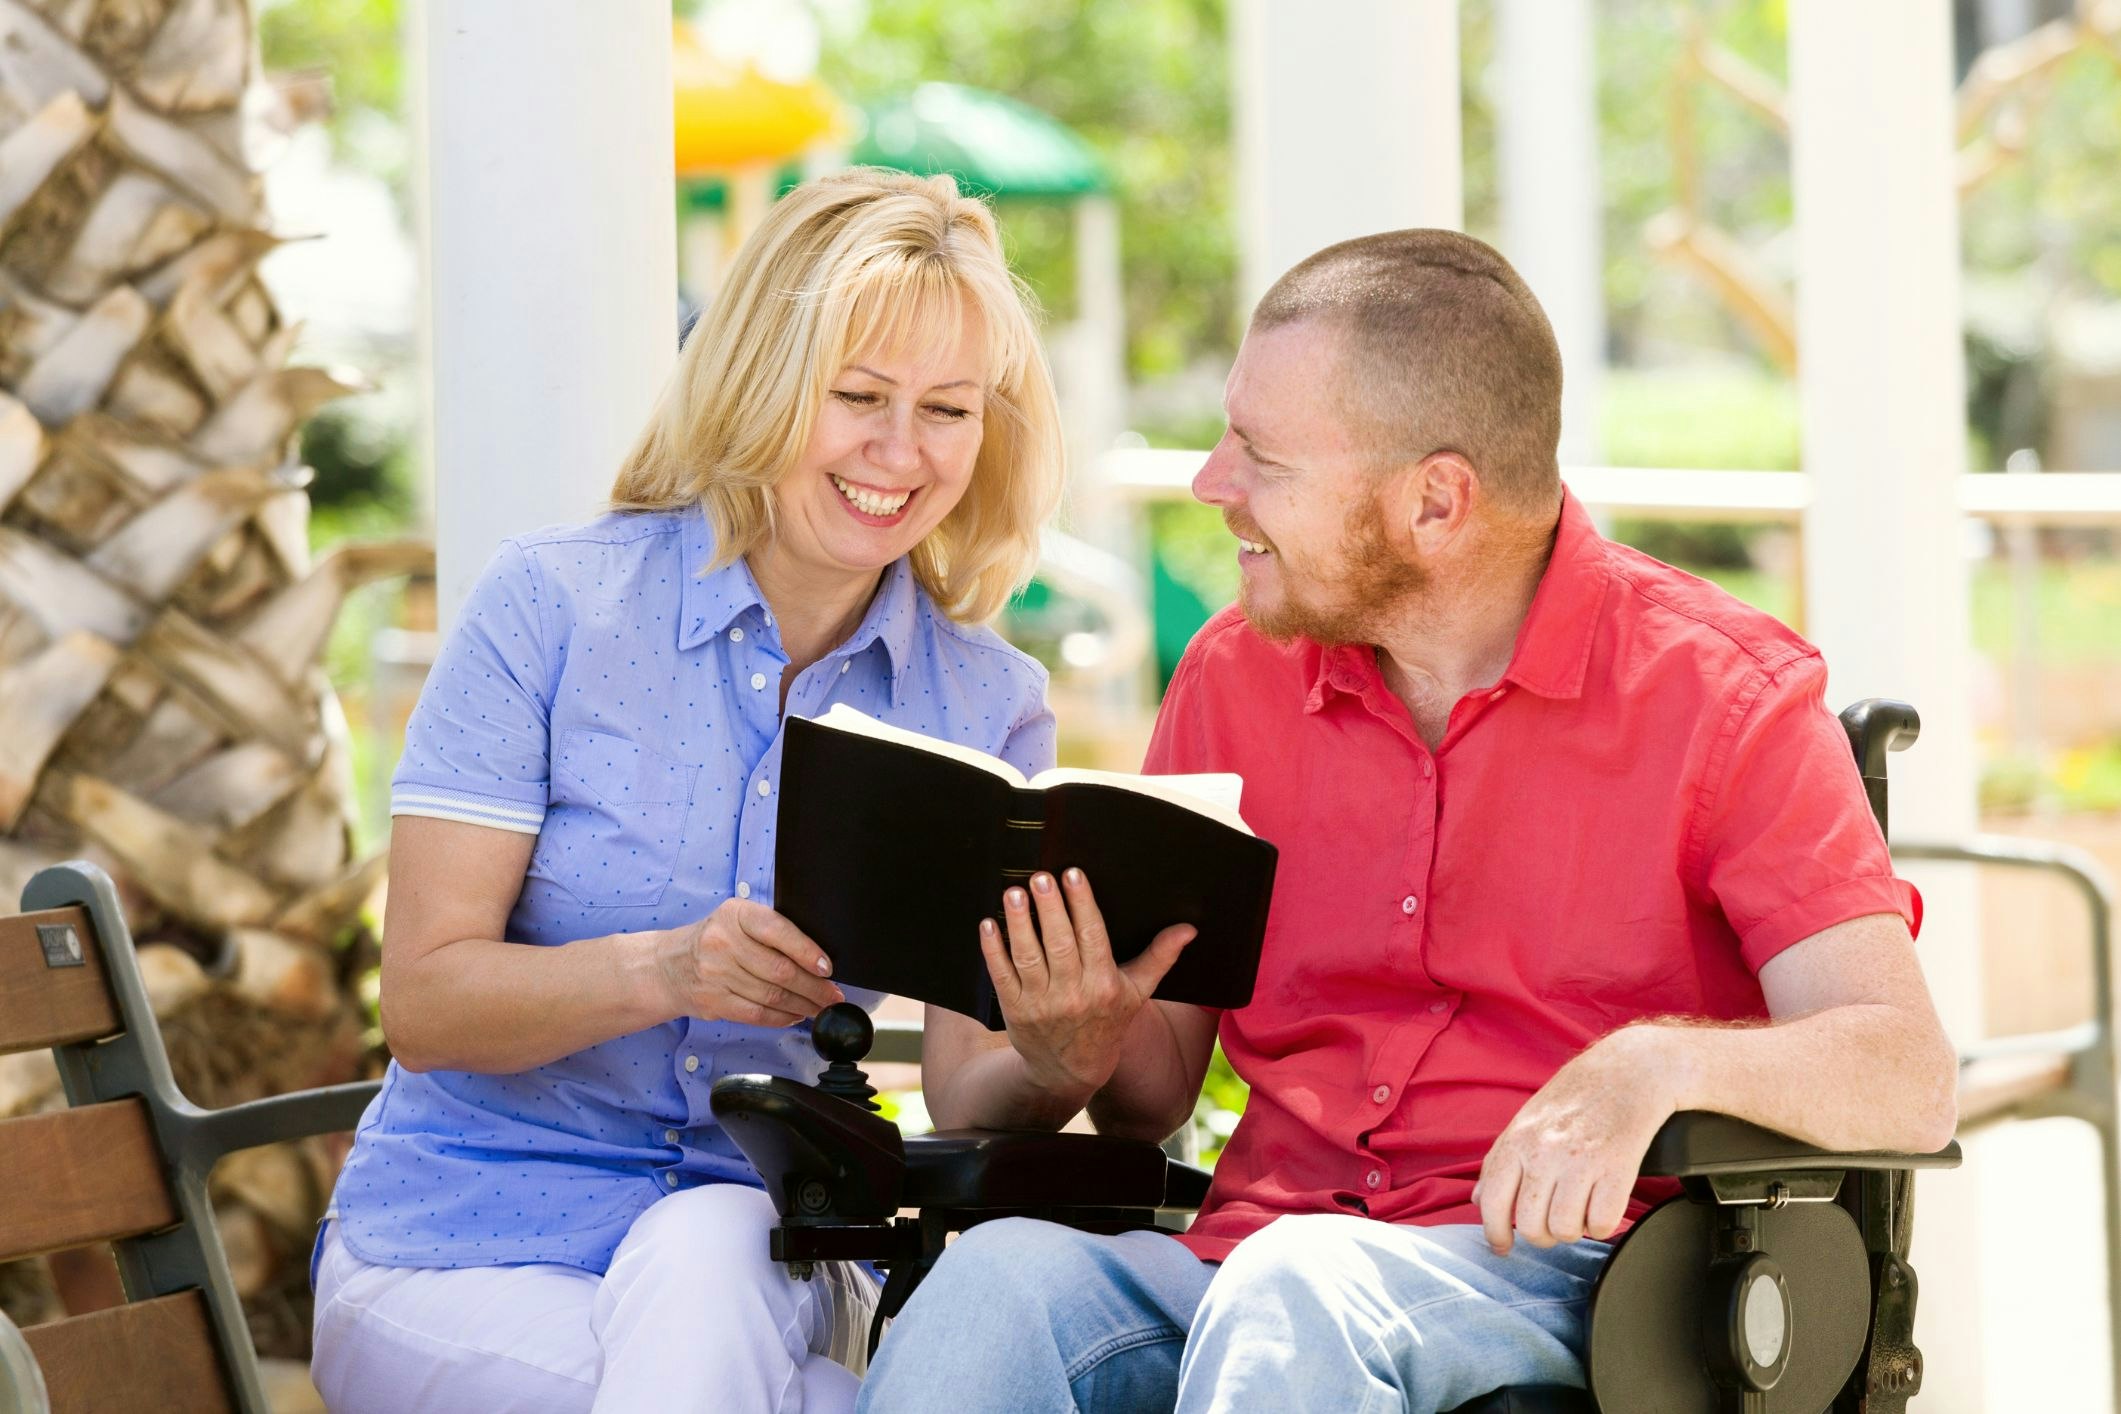 <p>Unpaid carers have offered support to those who need it and the Victorian Government has funded a new grants program to enable their magnanimous efforts. [Source: Shutterstock]</p>
